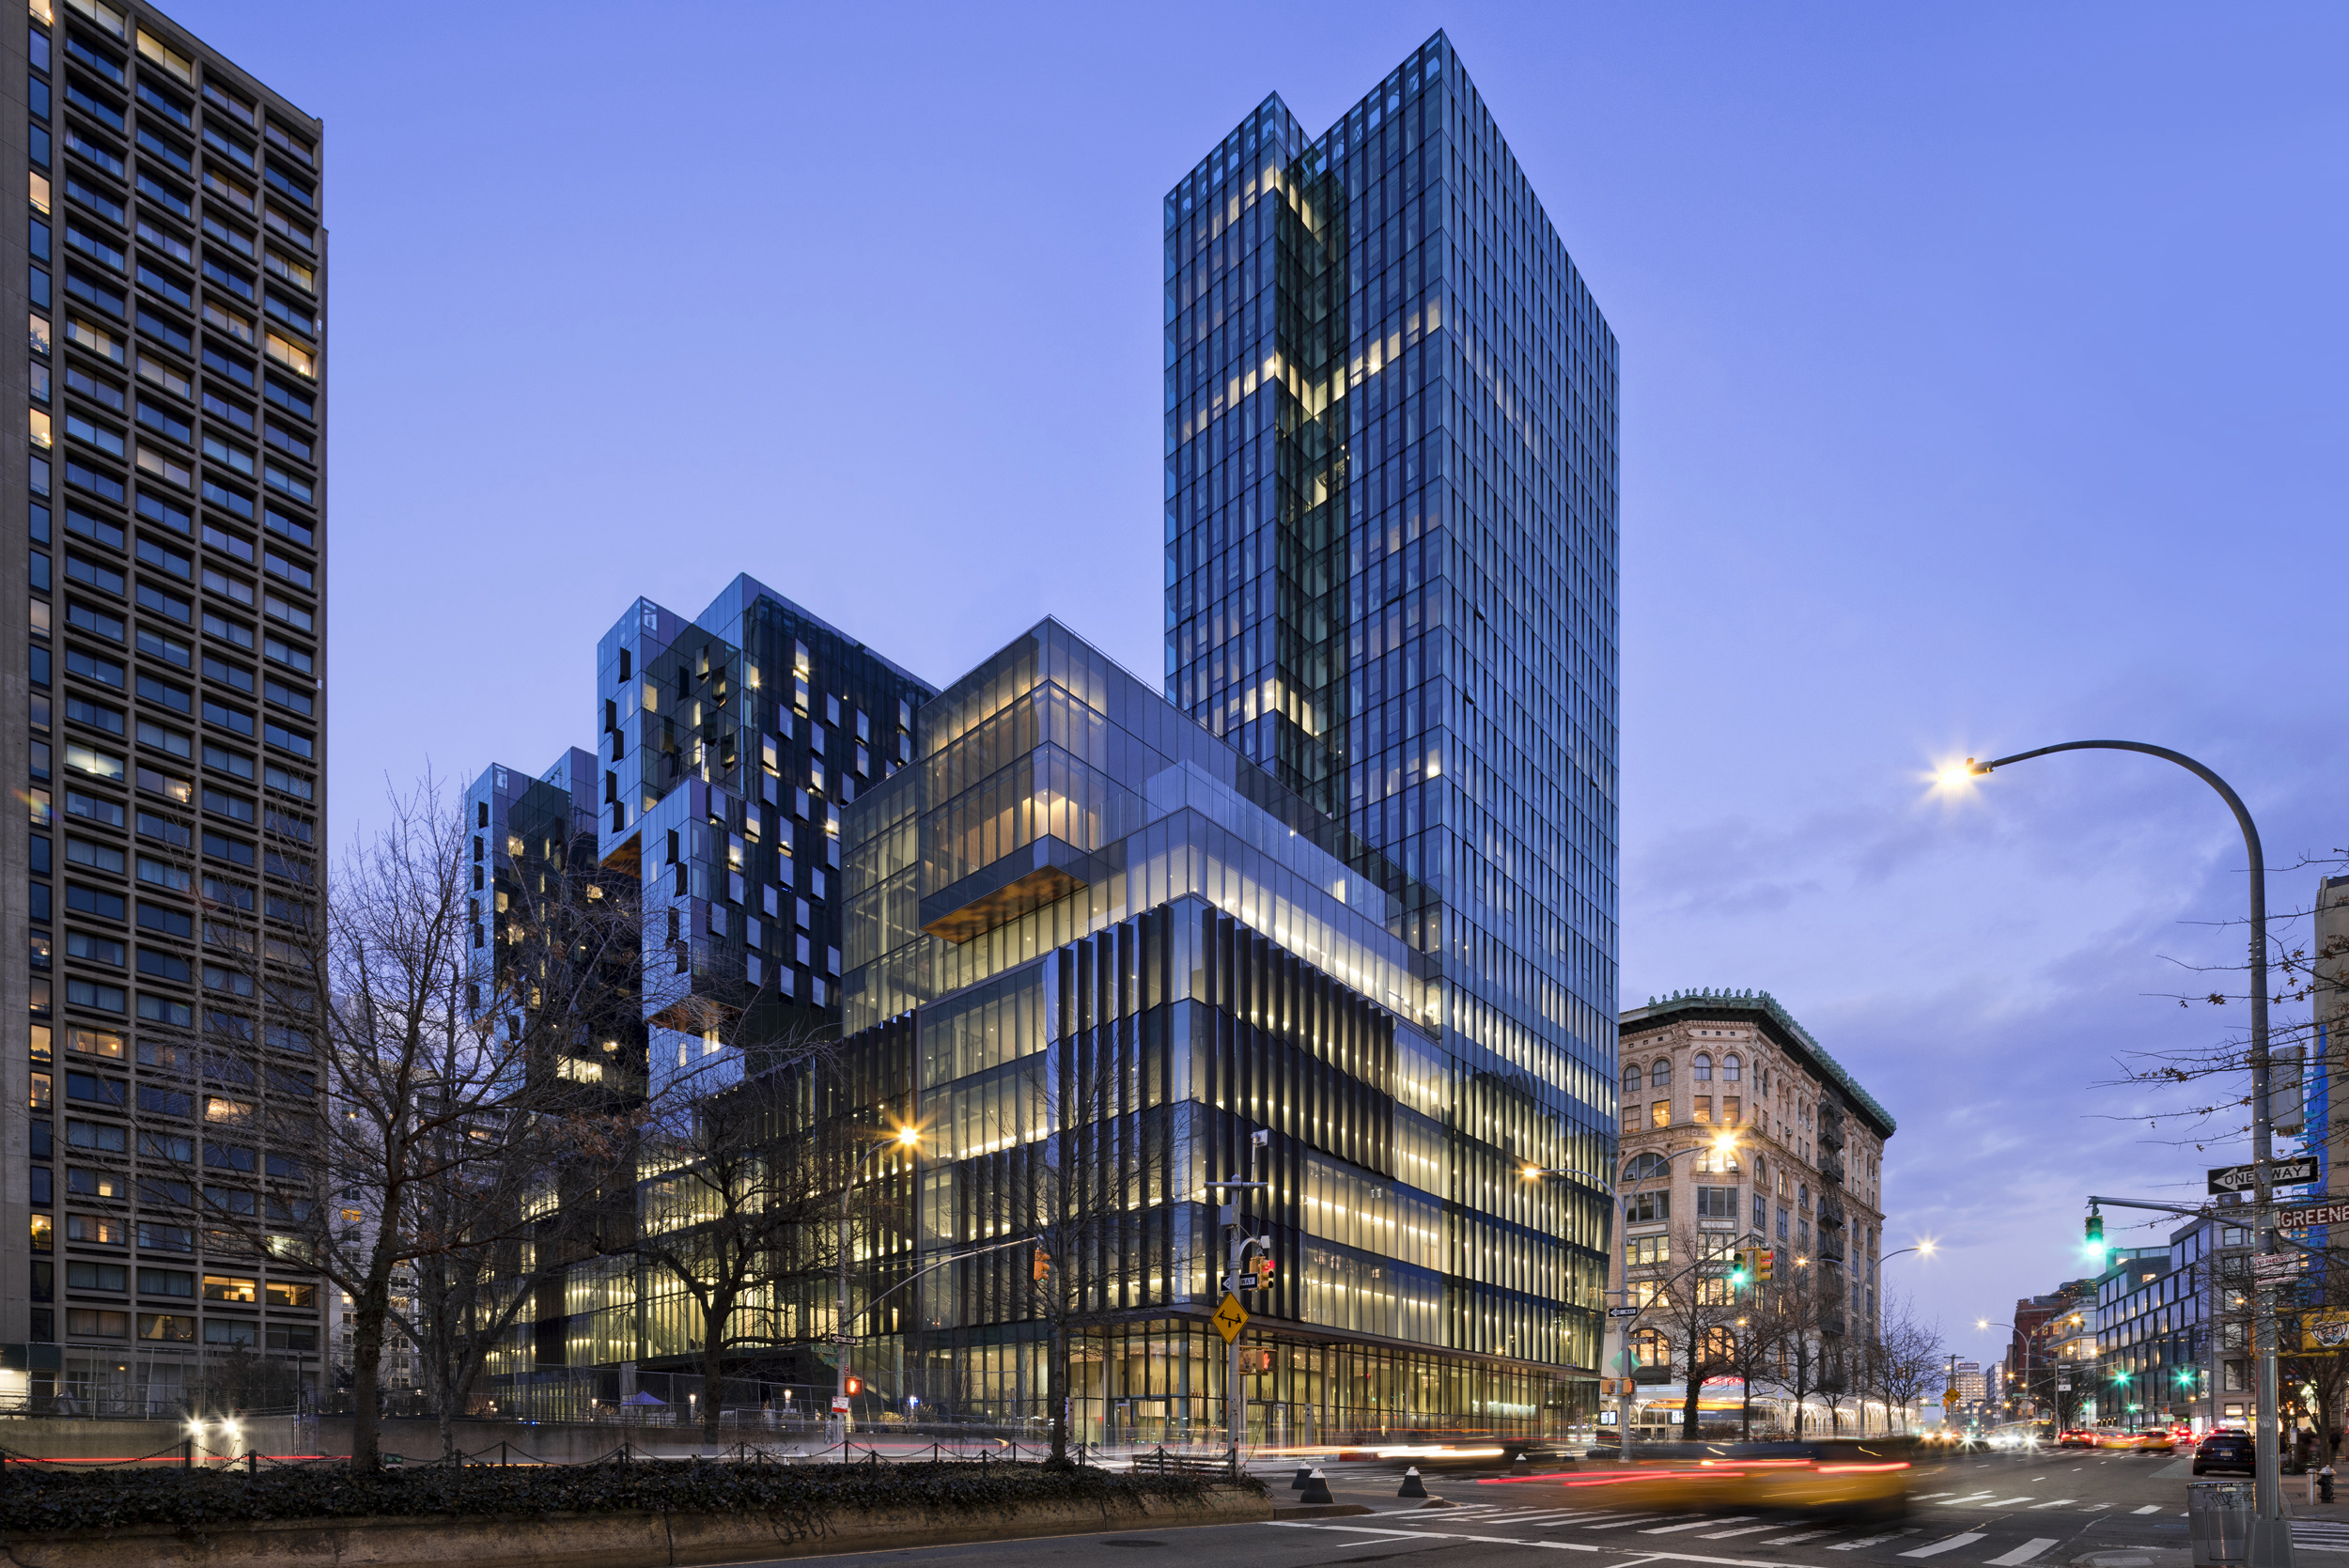 The John A. Paulson Center at New York University is a multipurpose building that includes three residential towers and 58 flexible classrooms.